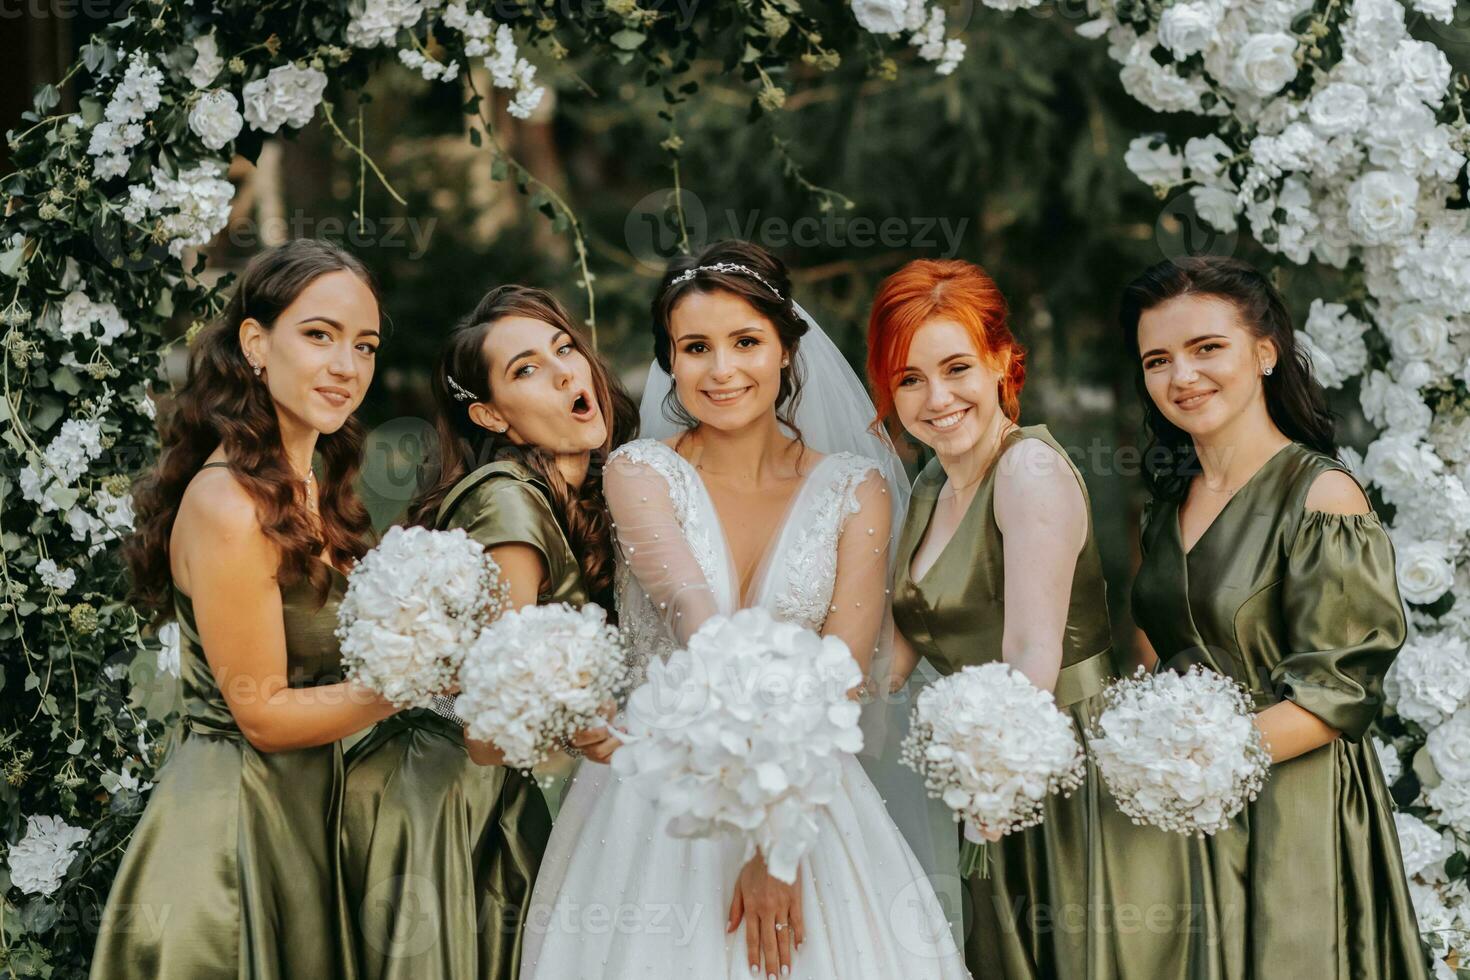 Bridesmaids smiling together with the bride. The bride and her fun friends celebrate the wedding after the ceremony in matching dresses. Bride and friends in nature photo